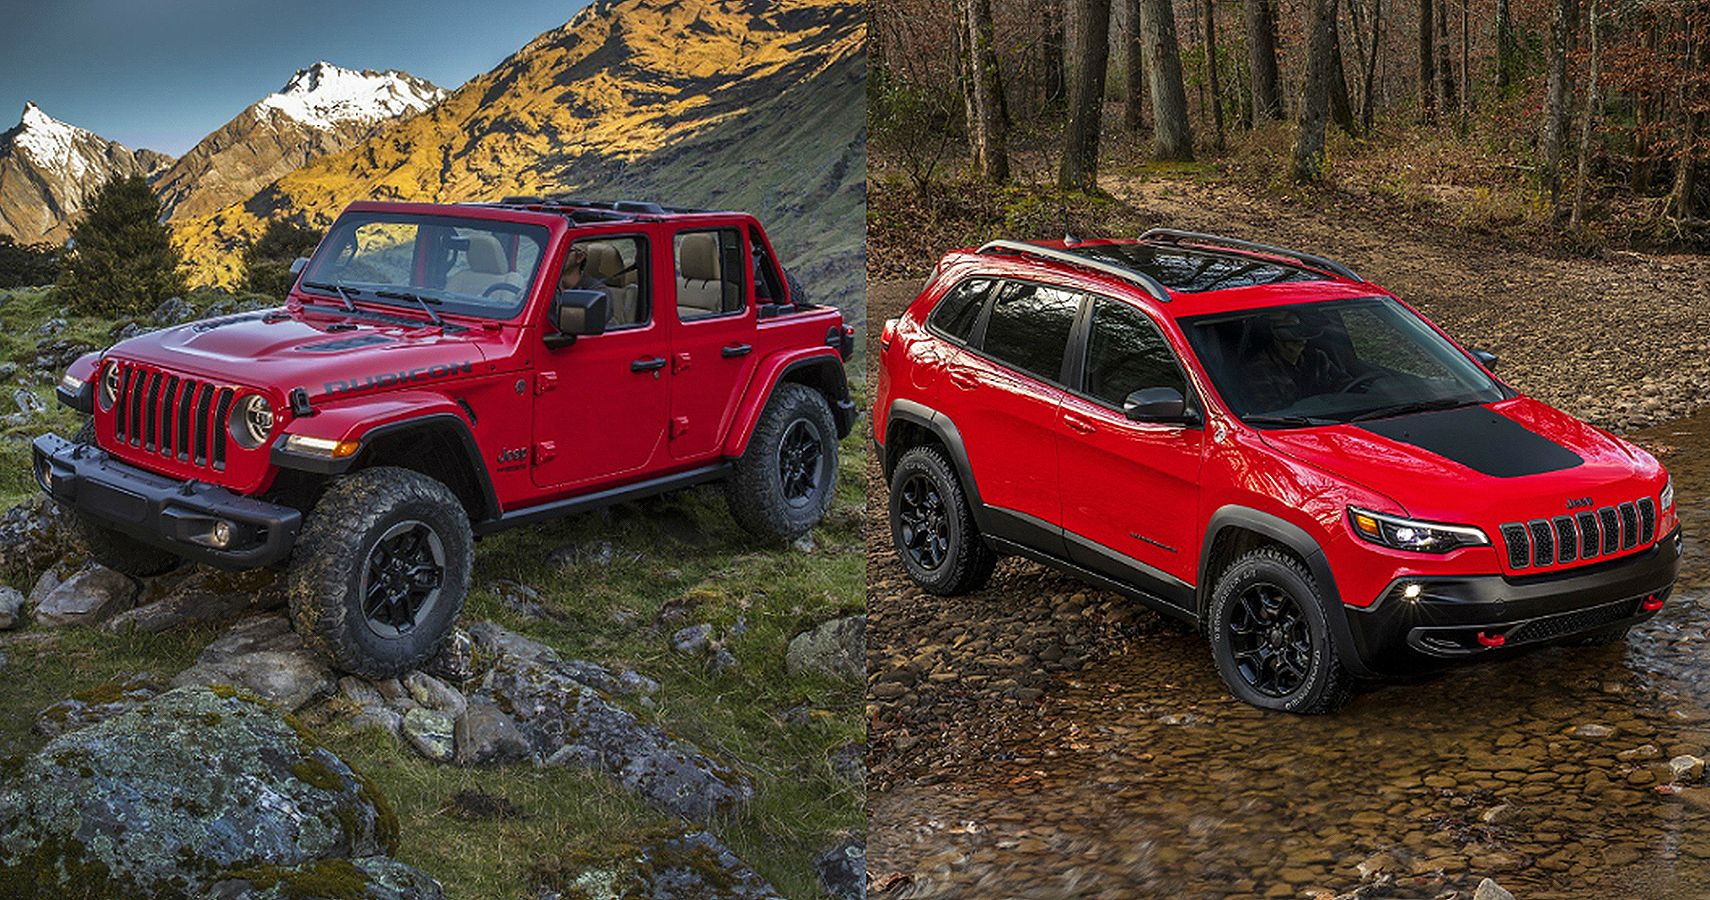 Which Jeep Should You Buy: Cherokee Vs. Wrangler